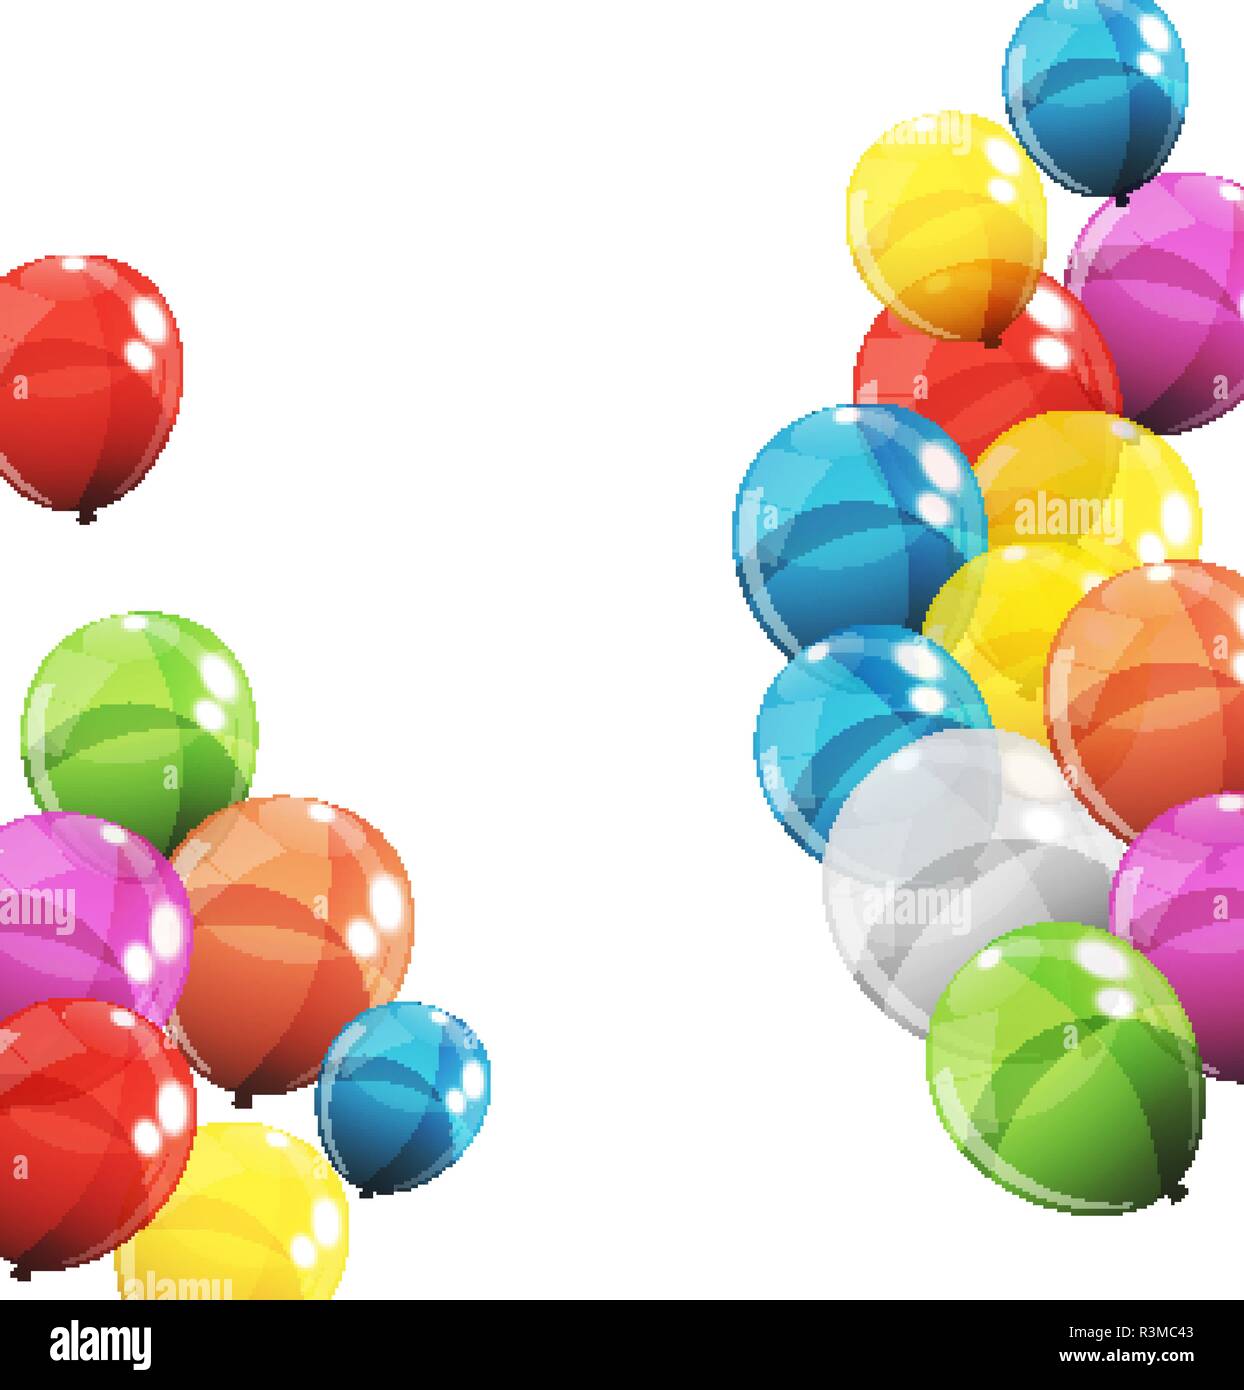 7,600+ String Of Balloons Stock Illustrations, Royalty-Free Vector